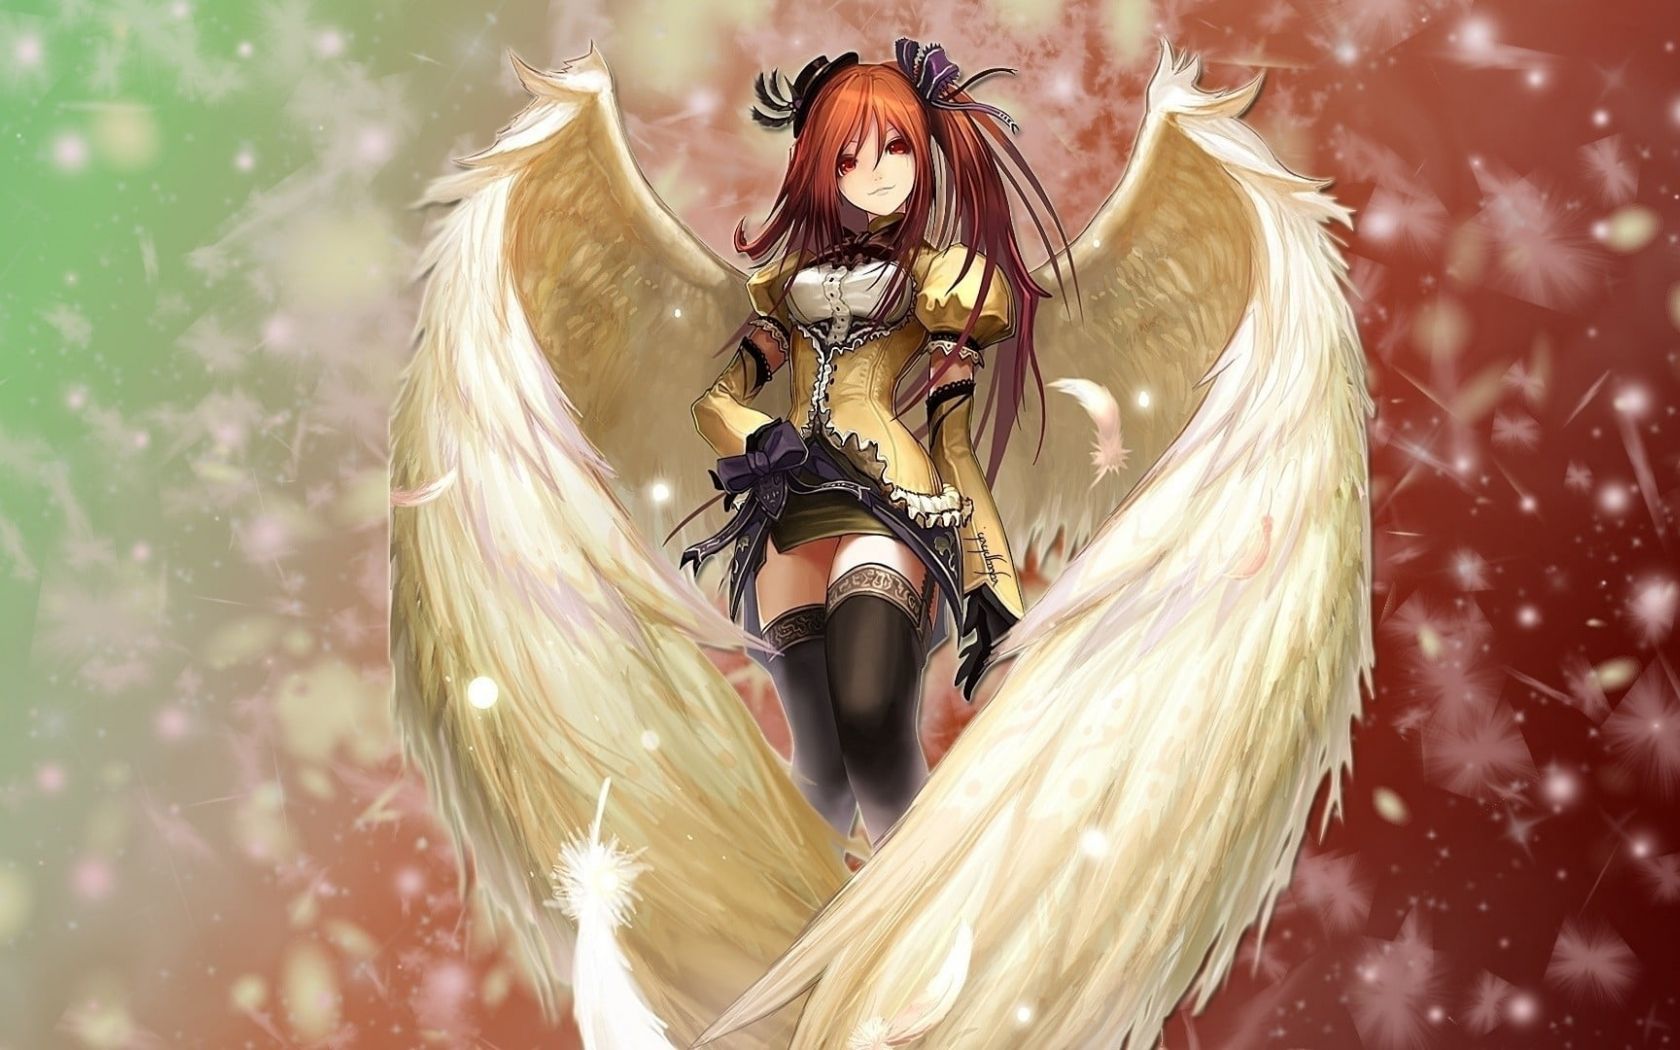 Free download Red haired winged angel anime girl illustration HD